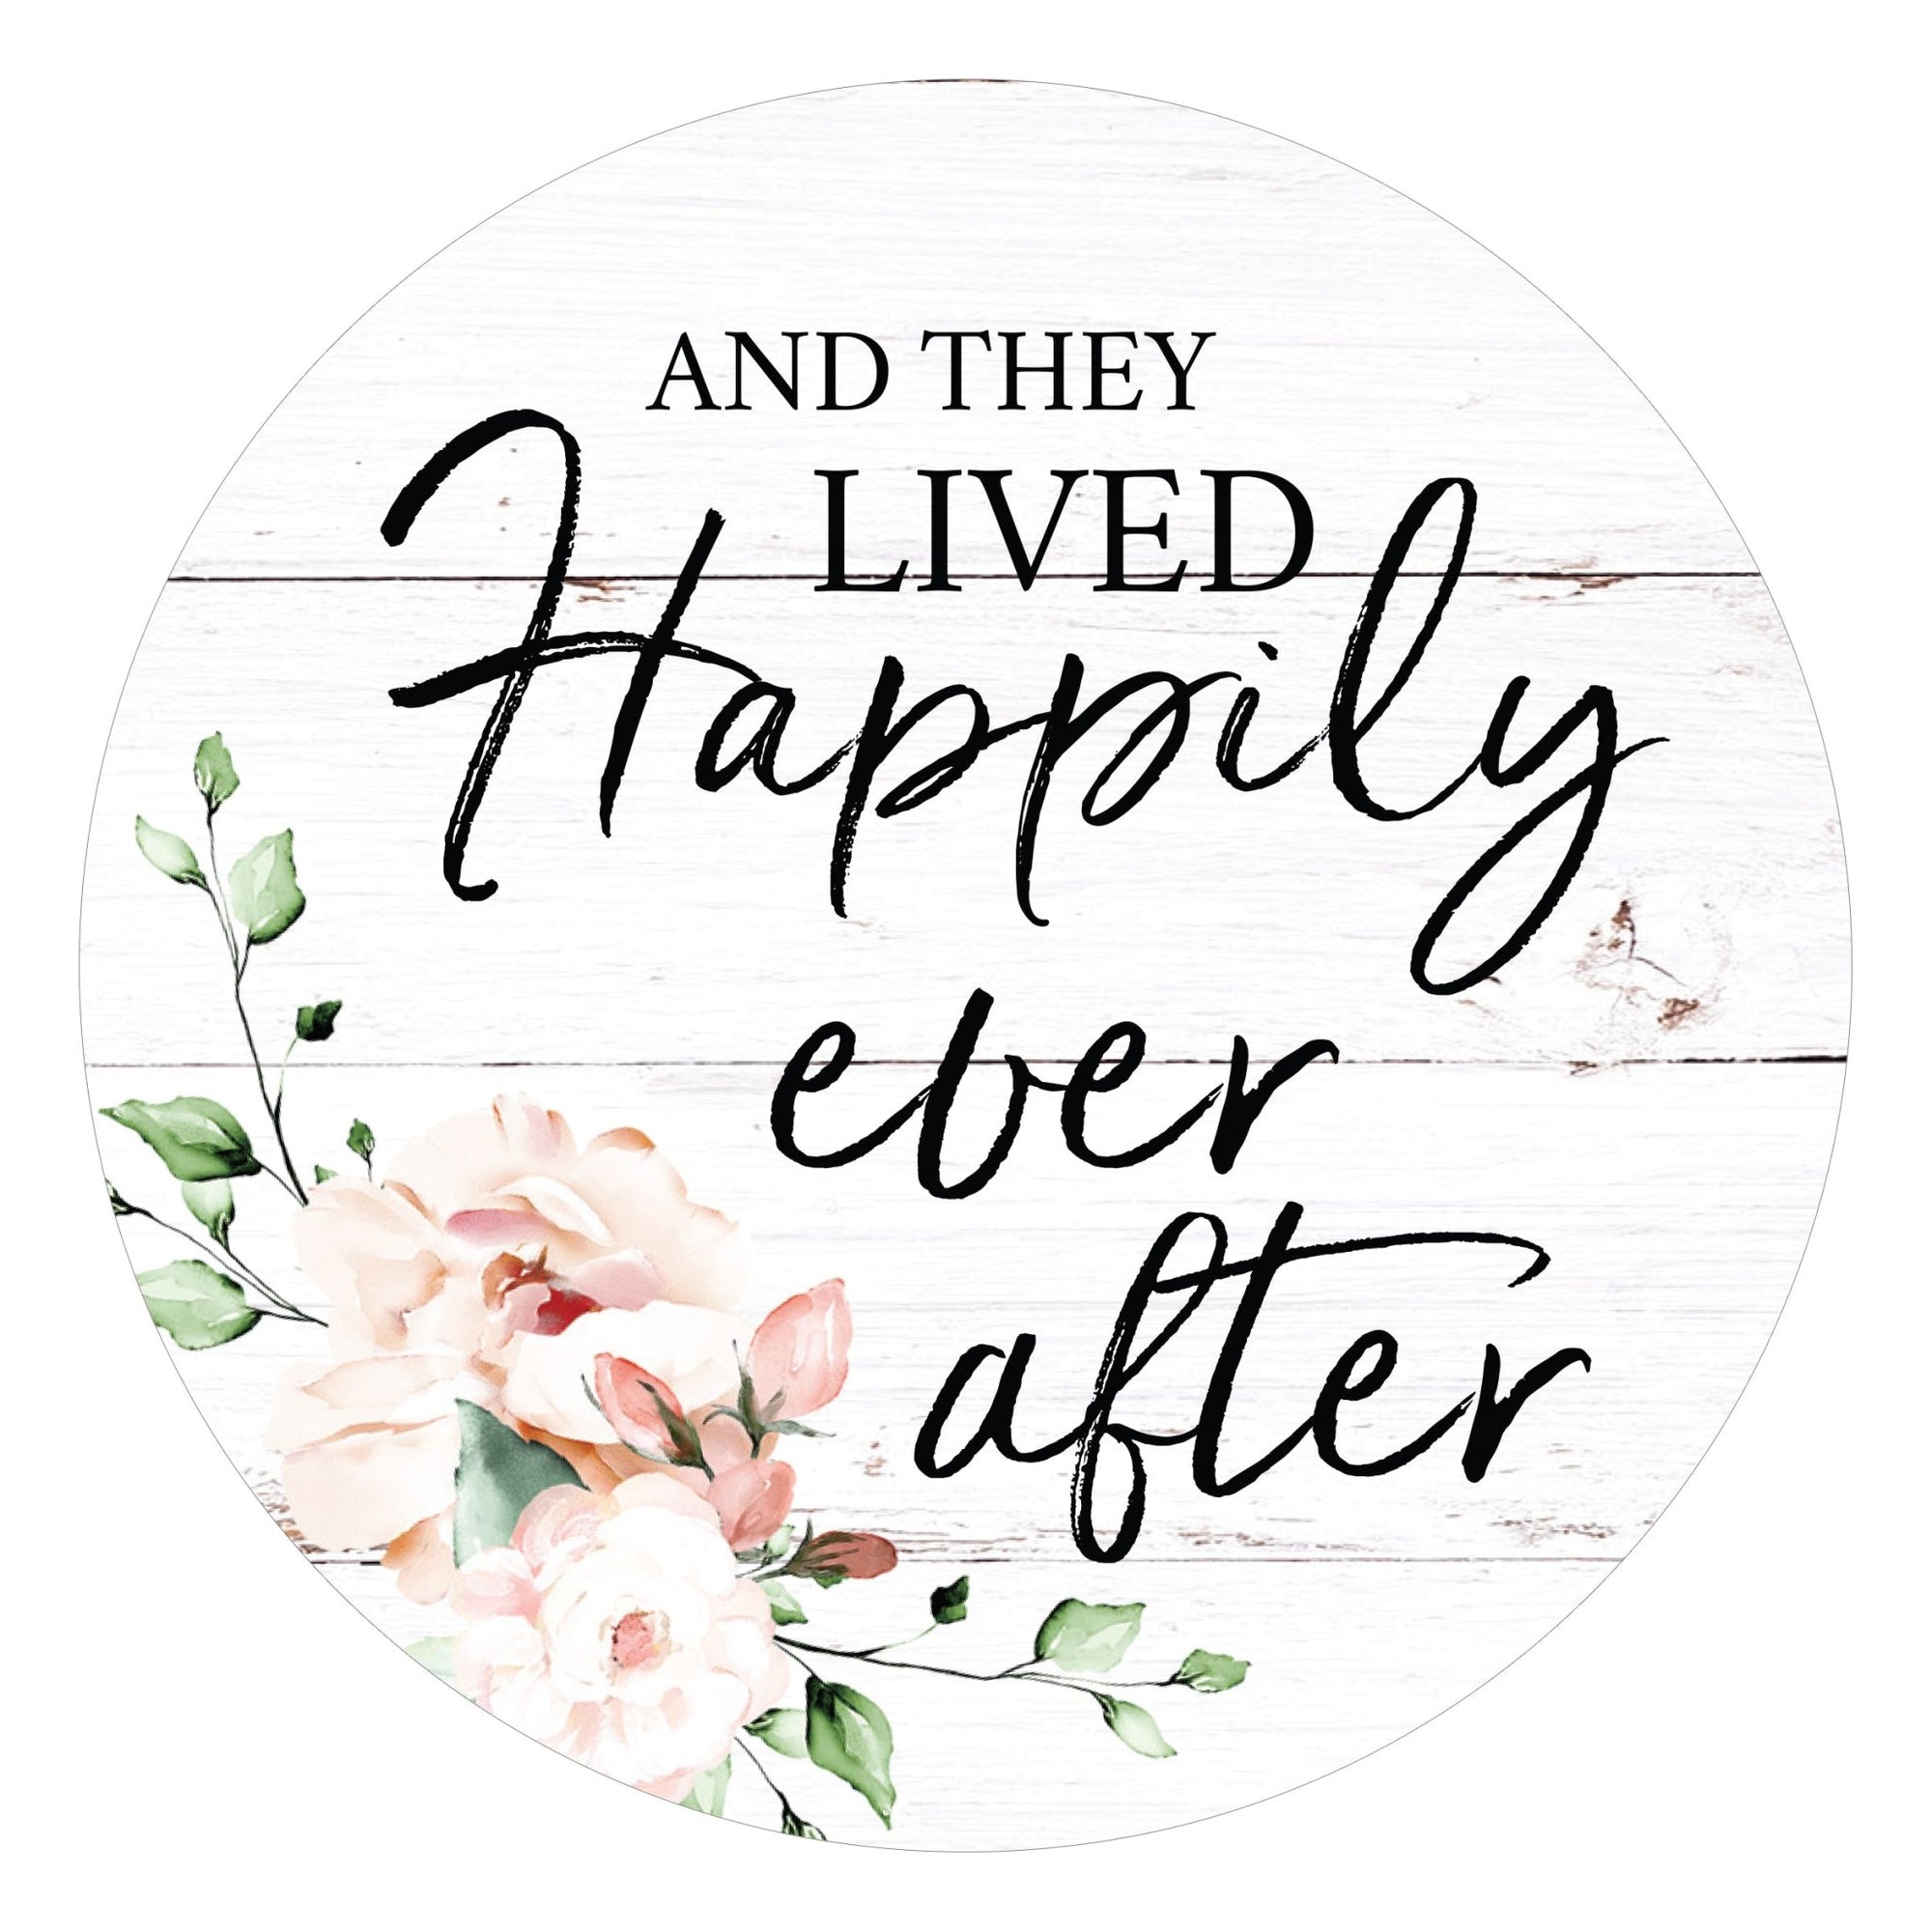 Family & Home Refrigerator Magnet Perfect Gift Idea For Home Décor - Happily Ever After